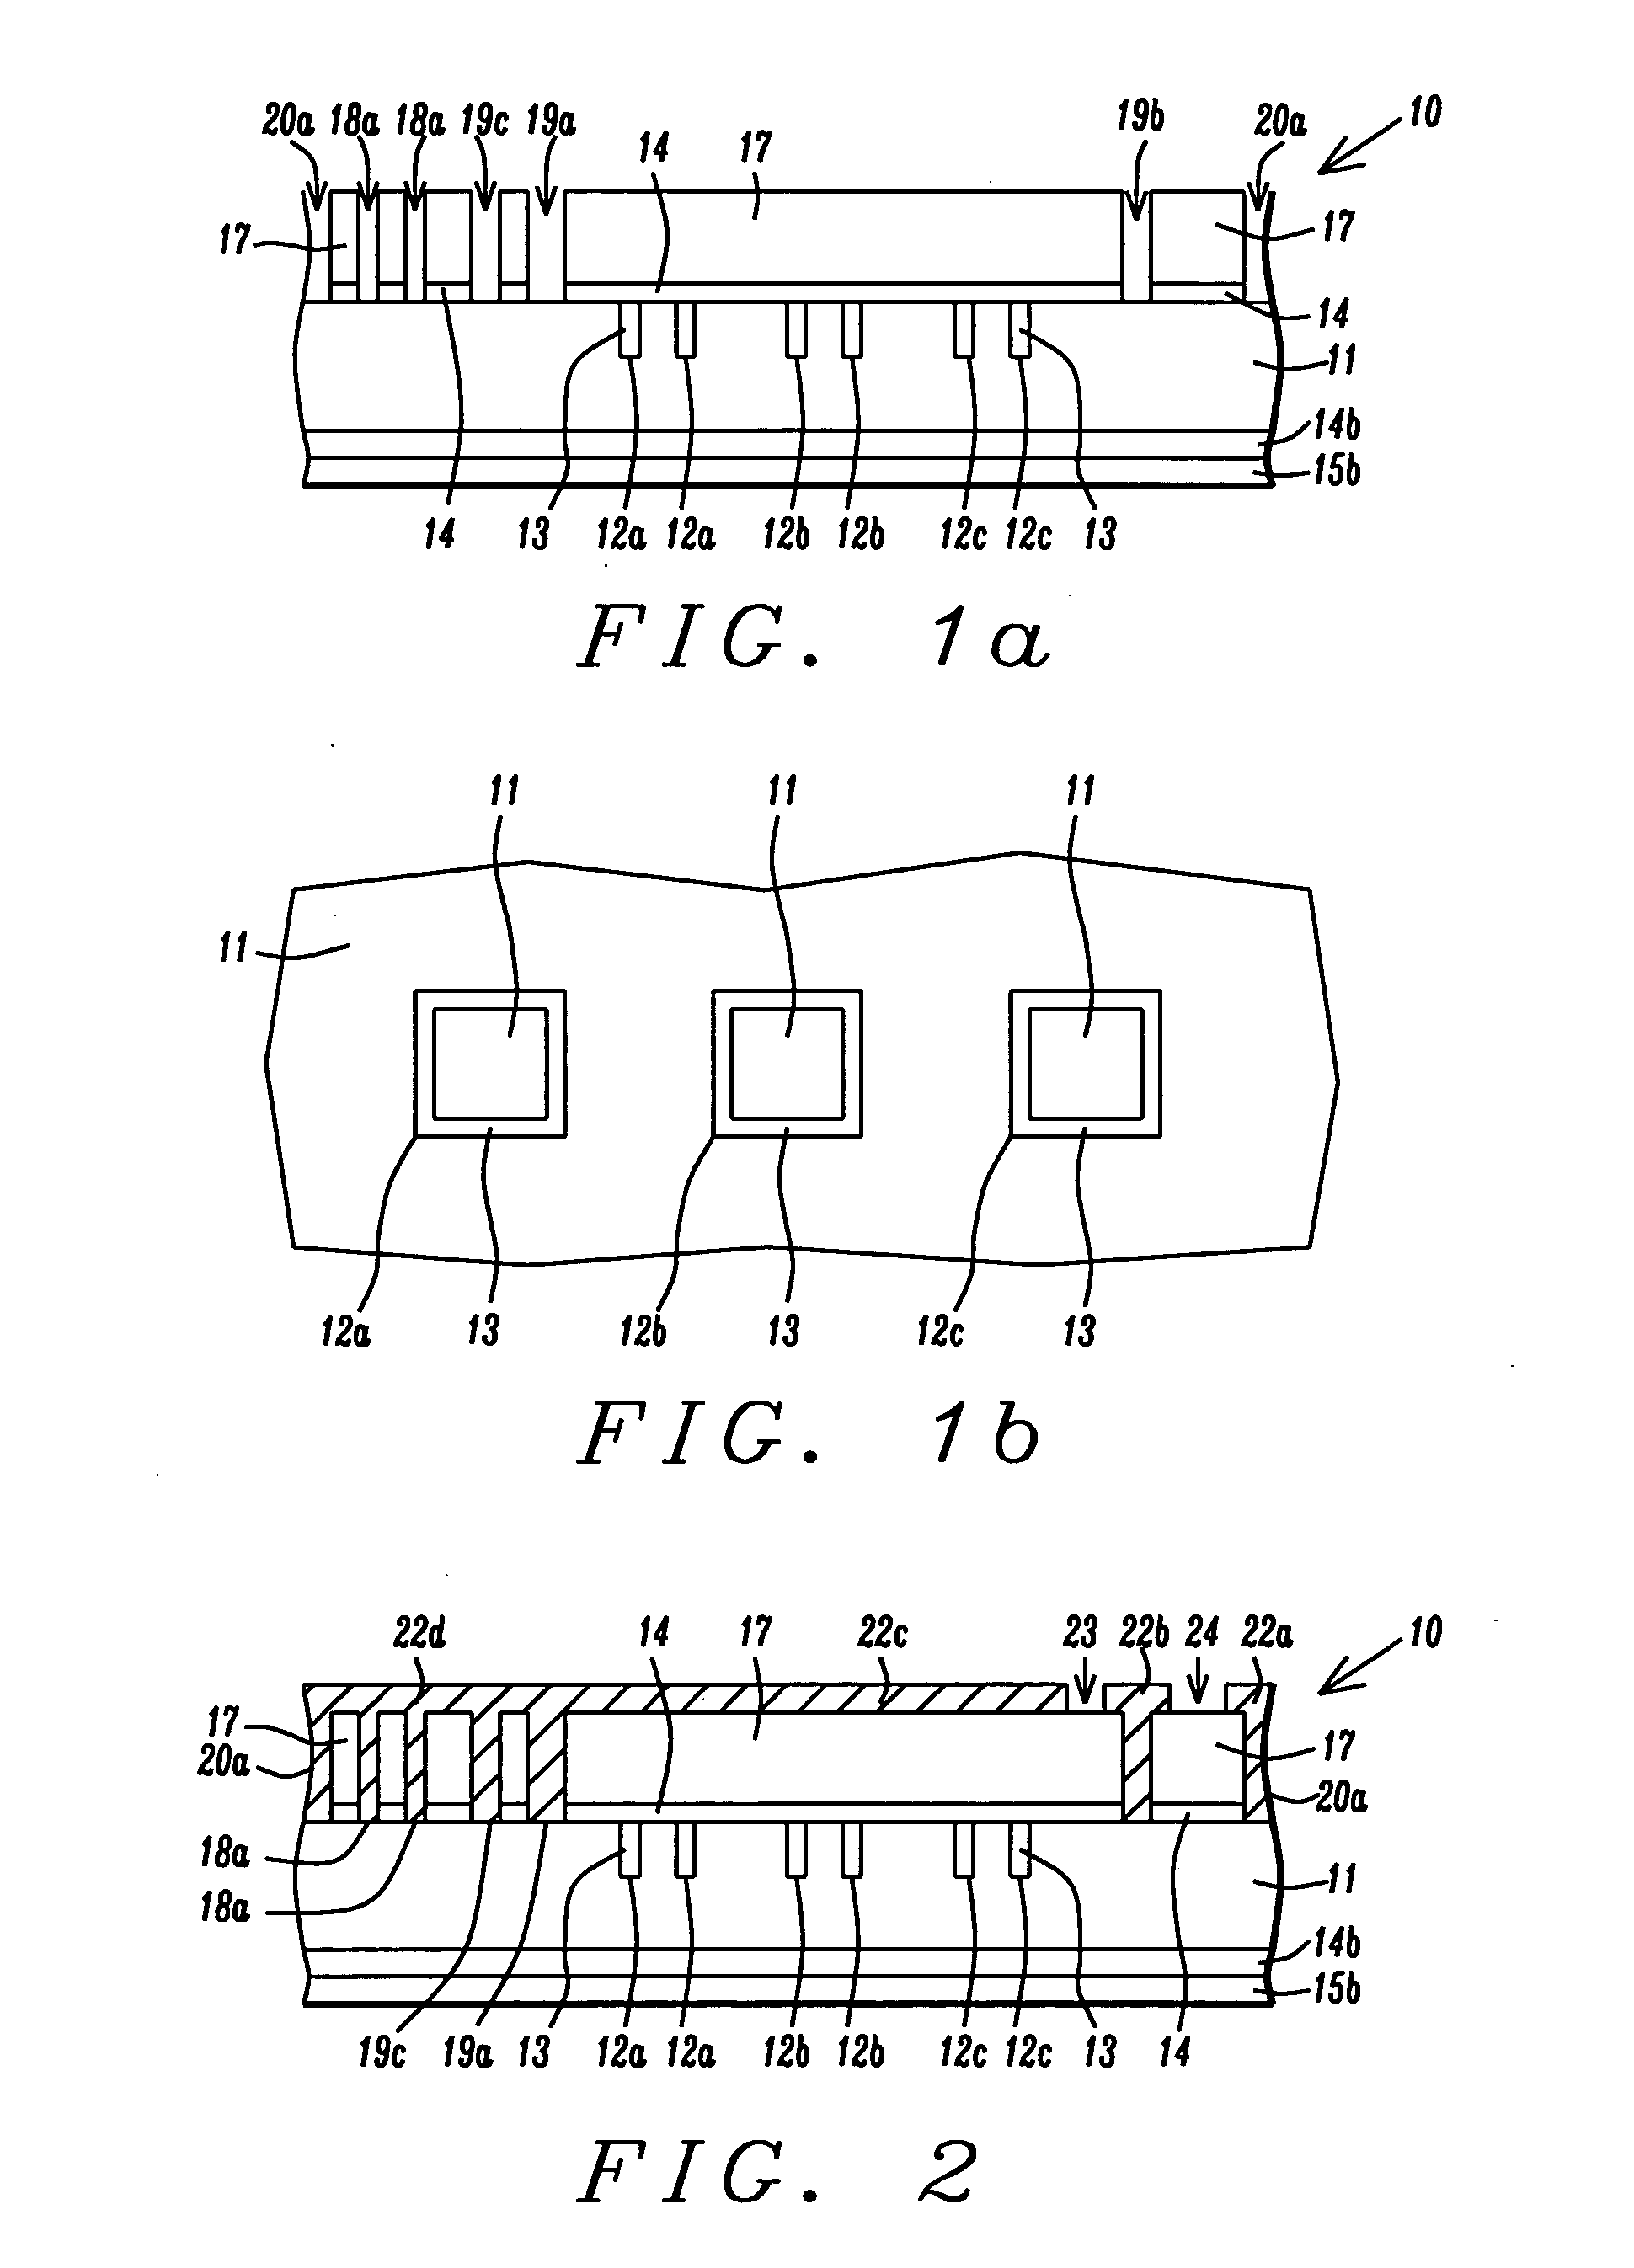 Silicon microphone with softly constrained diaphragm